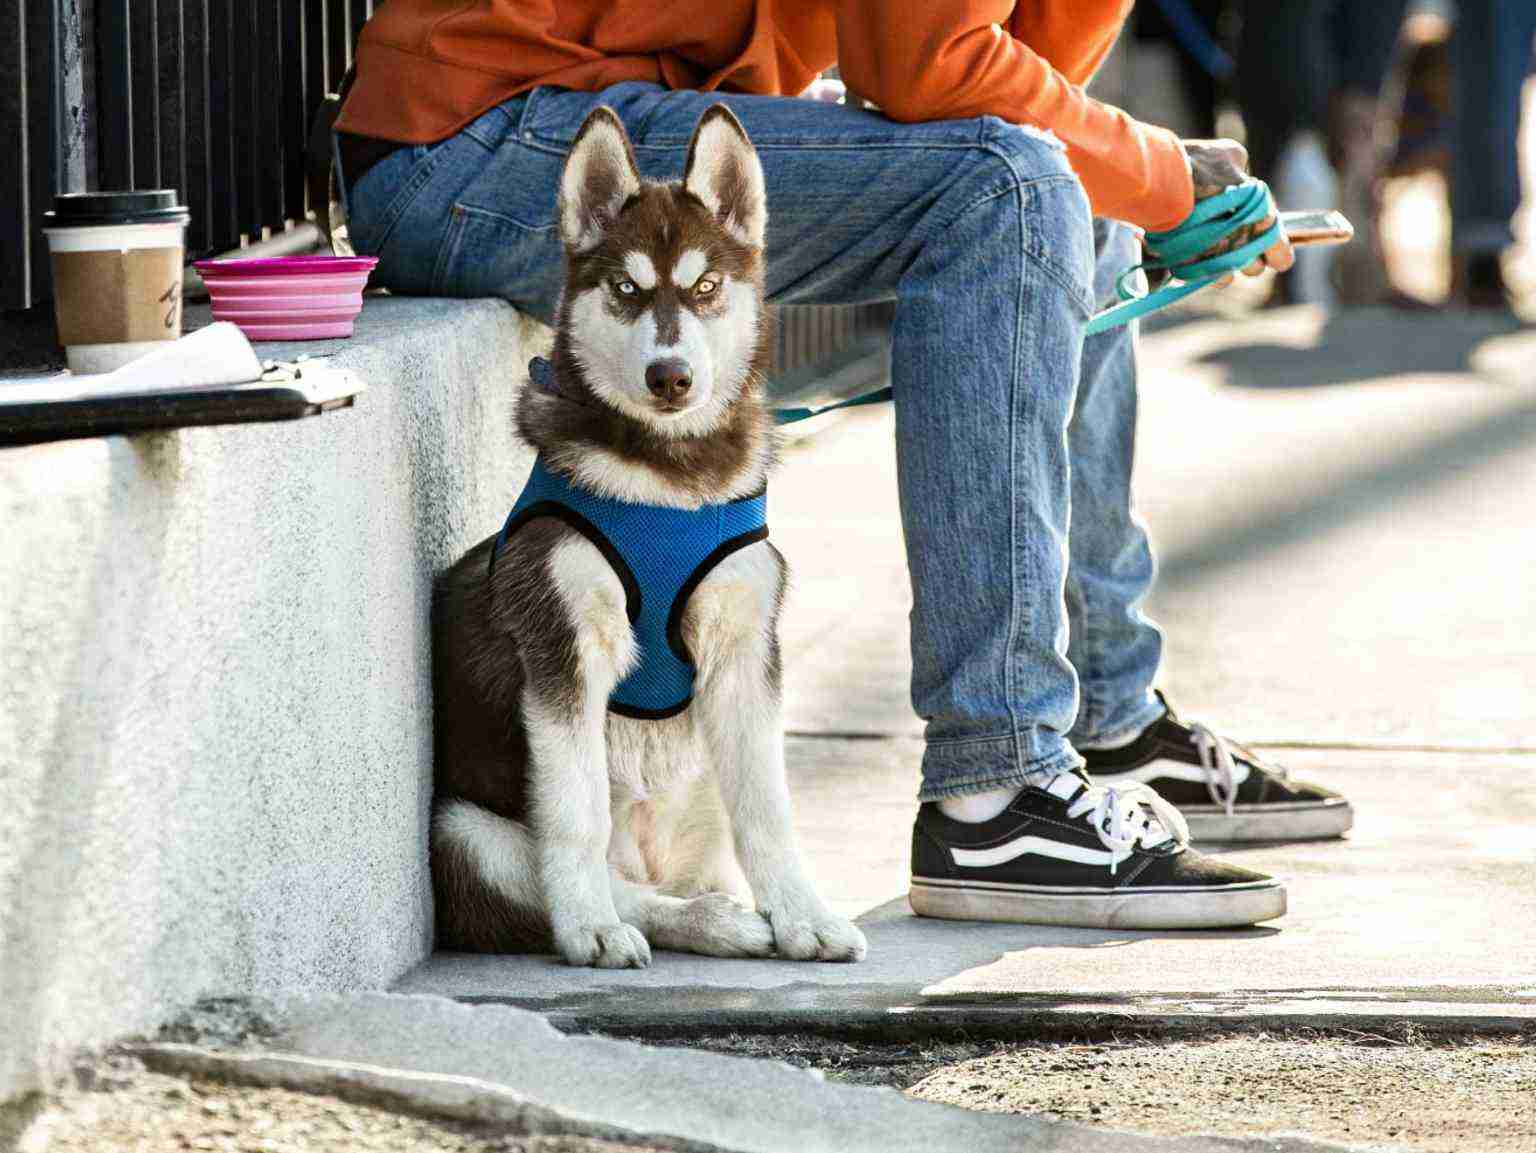 A grumpy husky puppy sitting next to its owner